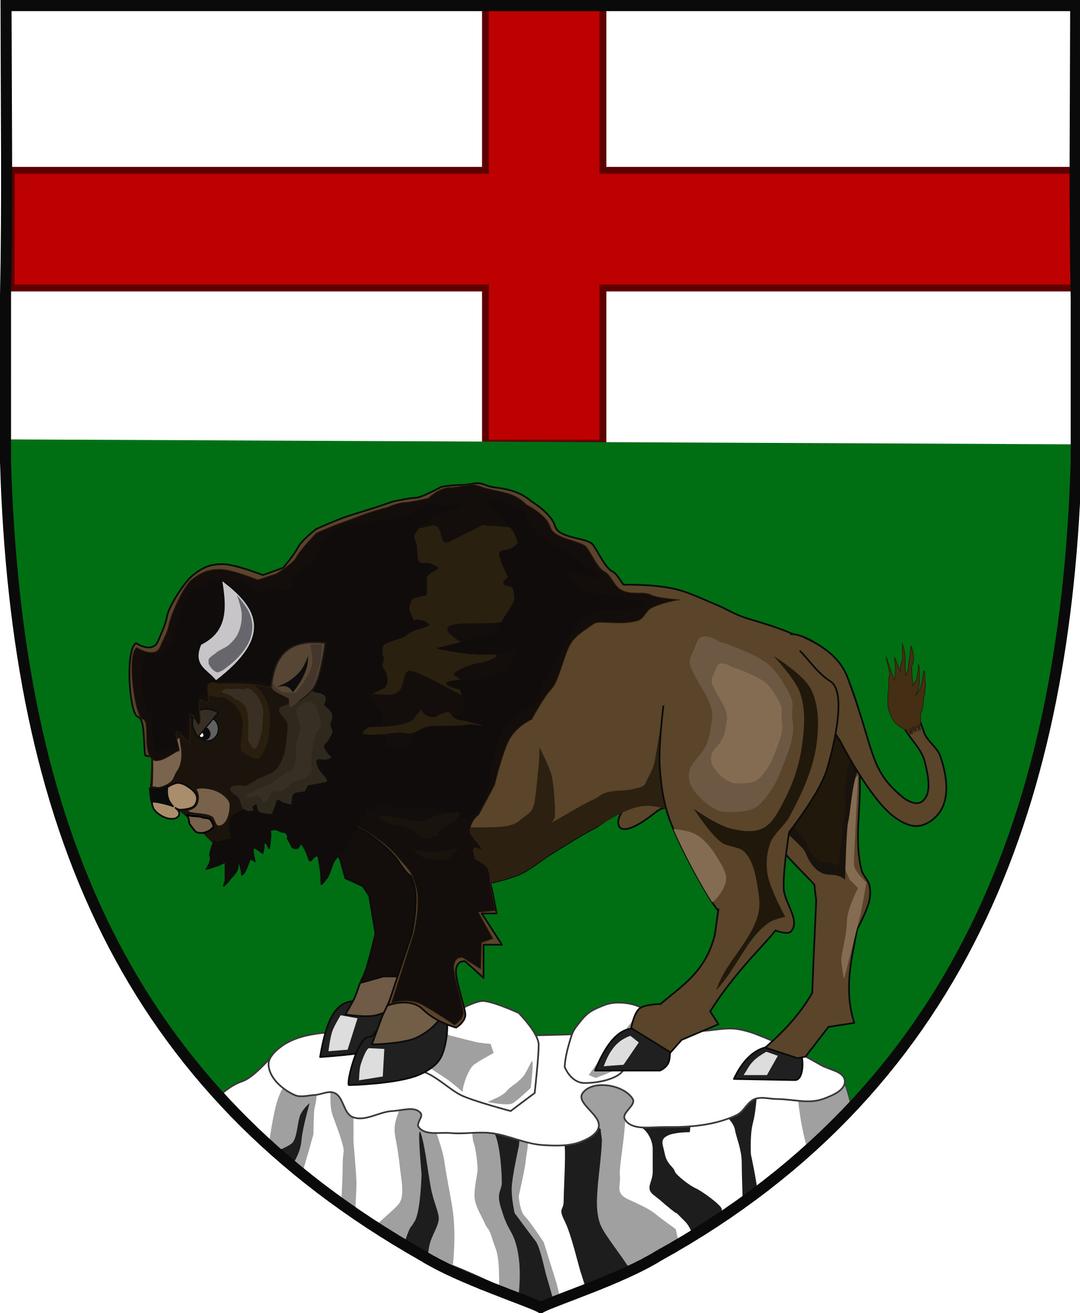 Shield Of Arms Of Manitoba png transparent